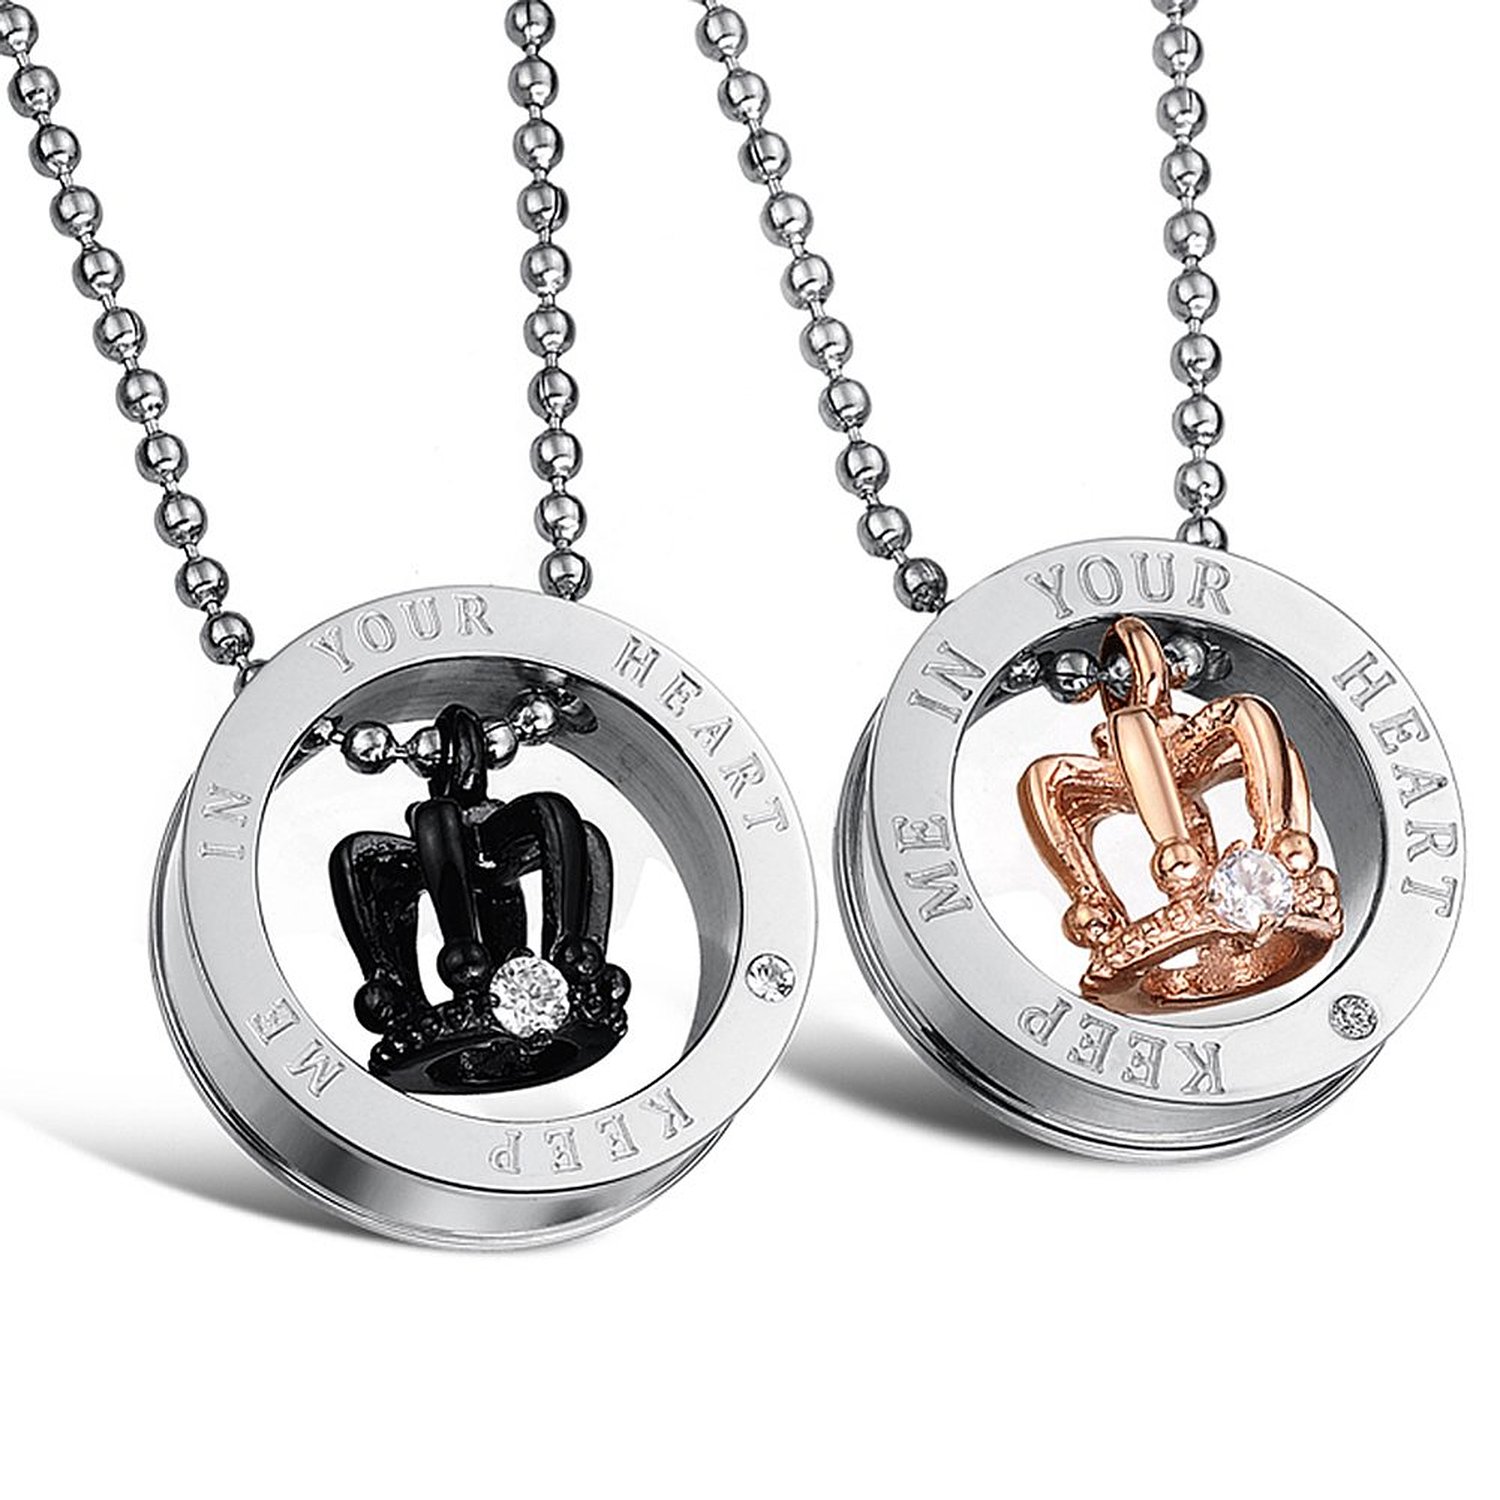 Daesar His & His Stainless Steel Couple Necklace Engraved Love Affair Pendant